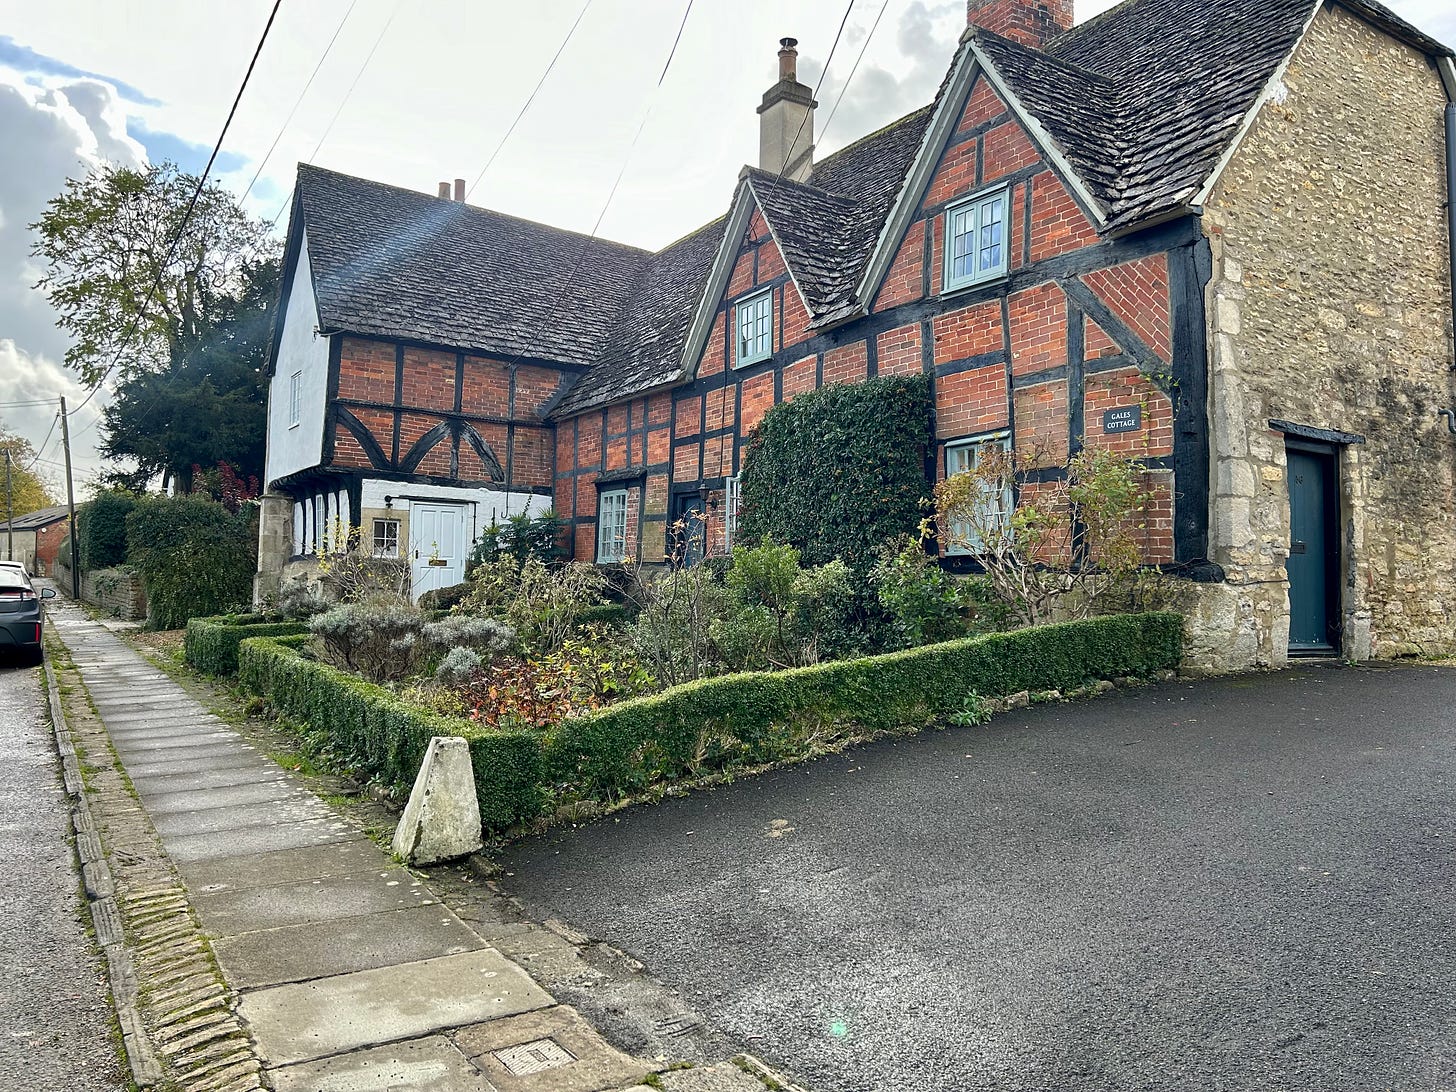 Gales Cottage, High Street, Steeple Ashton, Wiltshire. A timber-framed house with red brick infill. It is one of the many very old houses in this beautiful village. Image: Roland’s Travels